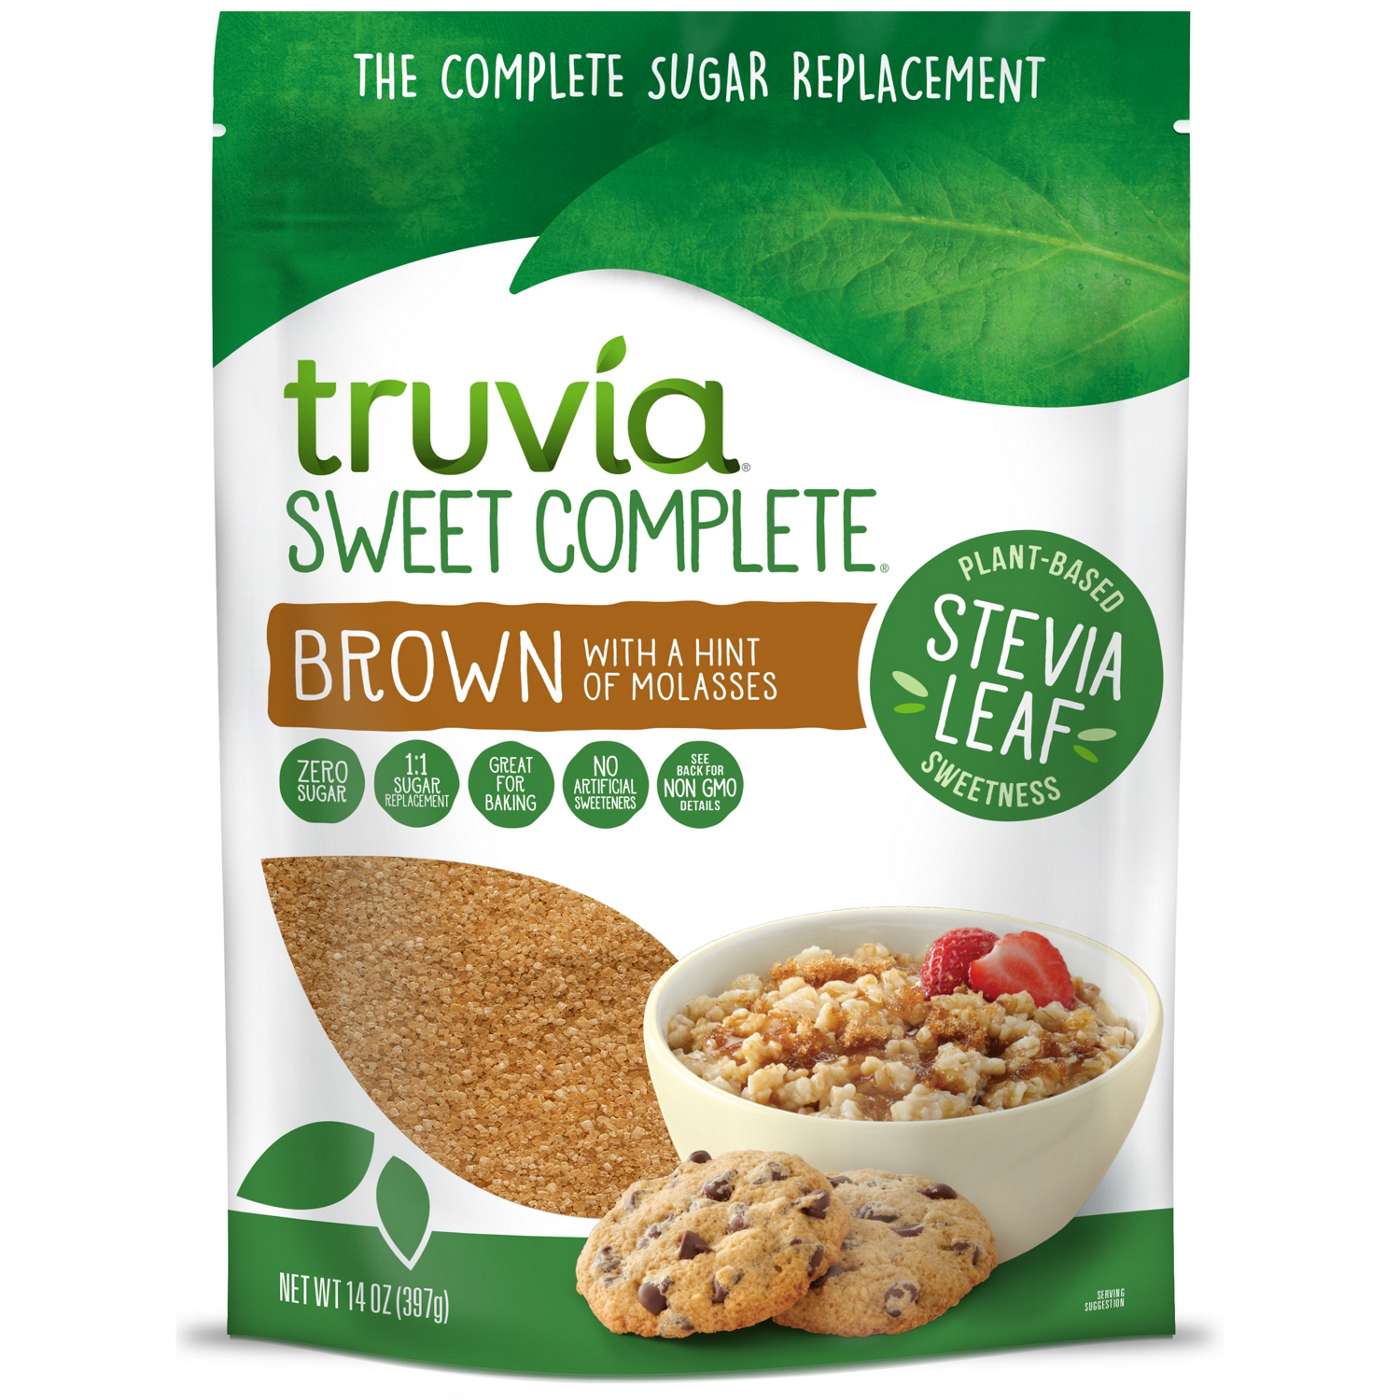 Truvia Sweet Complete Brown Calorie-Free Sweetener with Stevia Leaf Extract; image 1 of 5